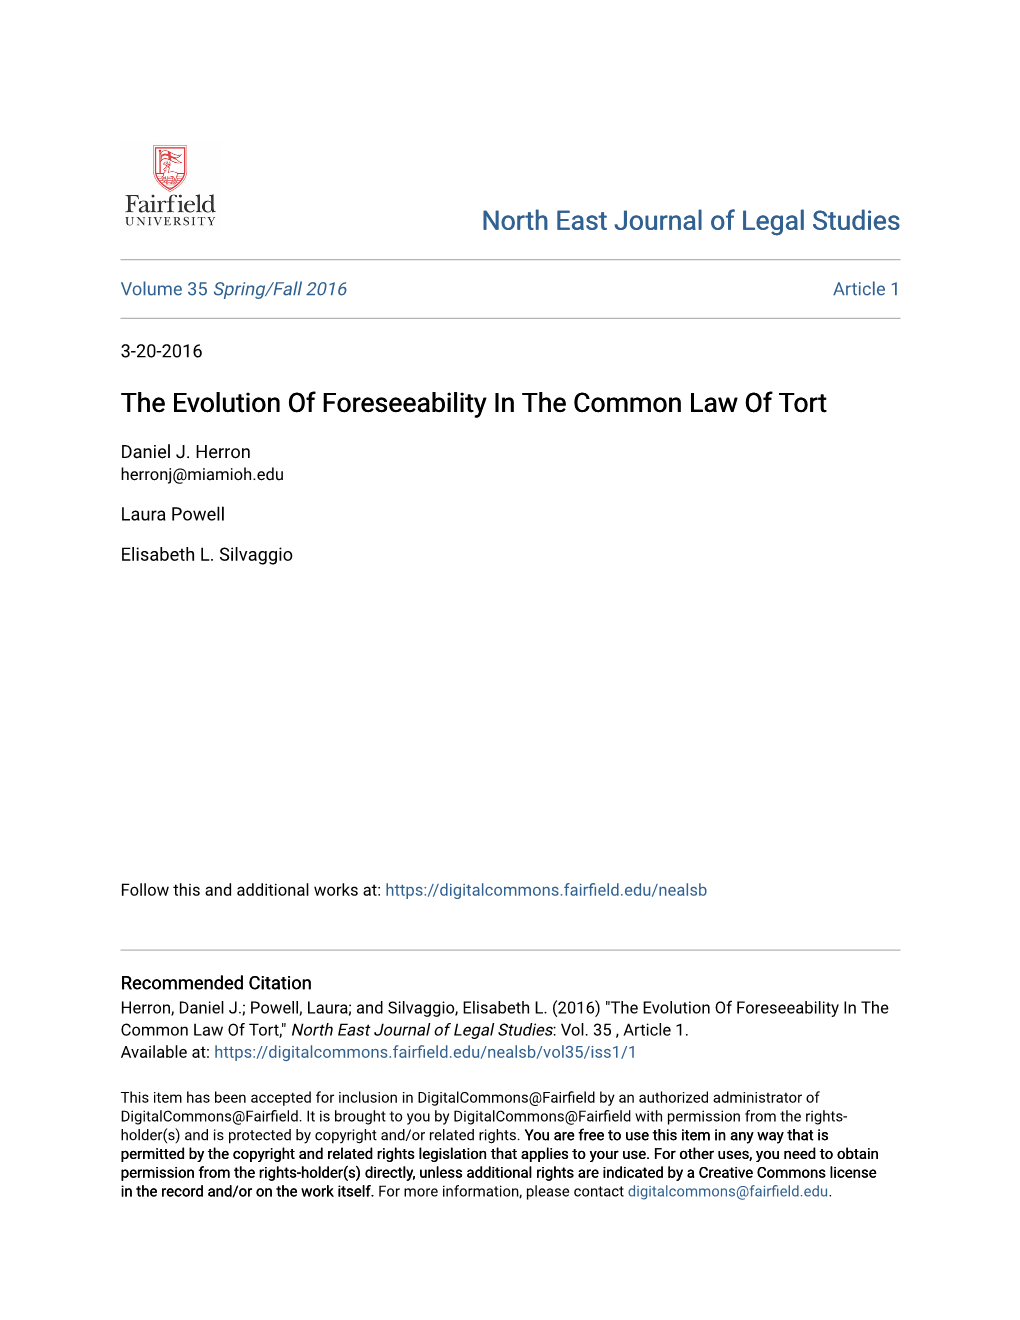 The Evolution of Foreseeability in the Common Law of Tort